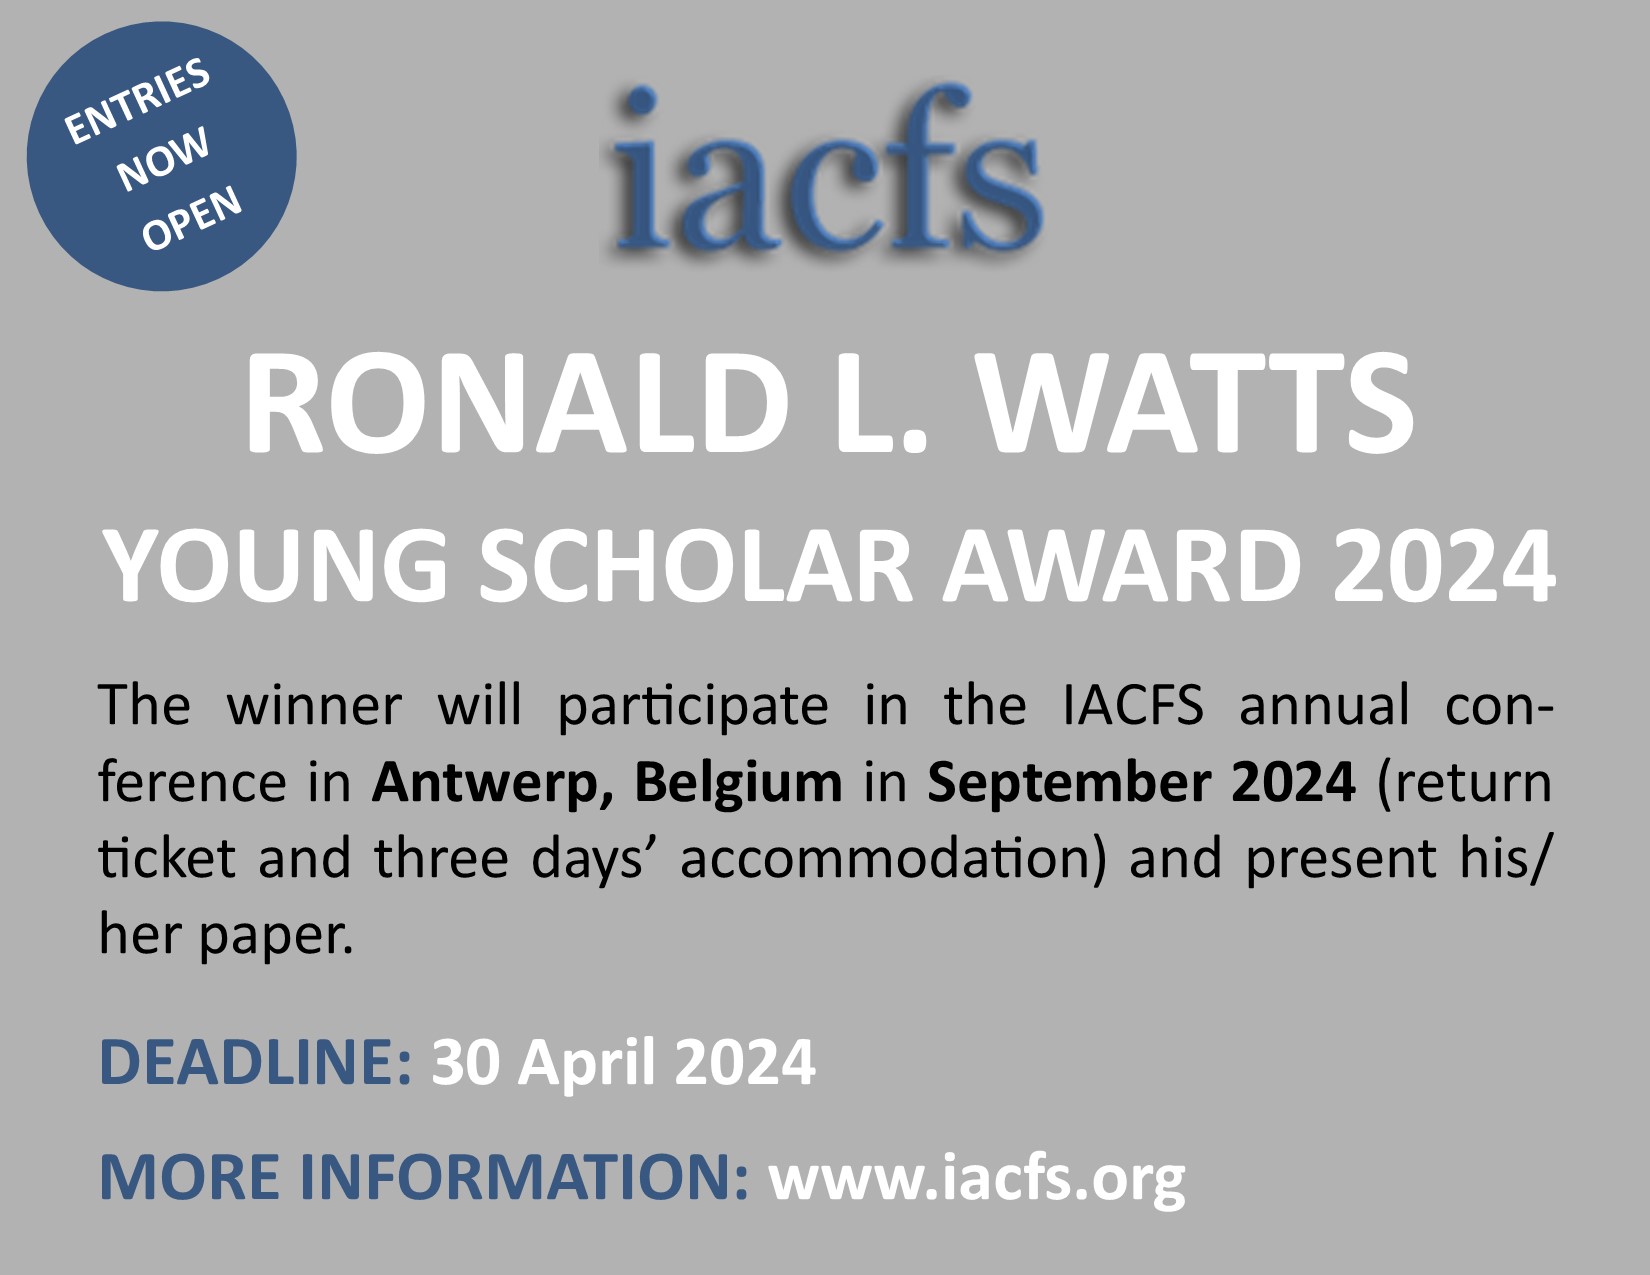 Ronald L. Watts Young Researcher Award 2024 Entries Now Open